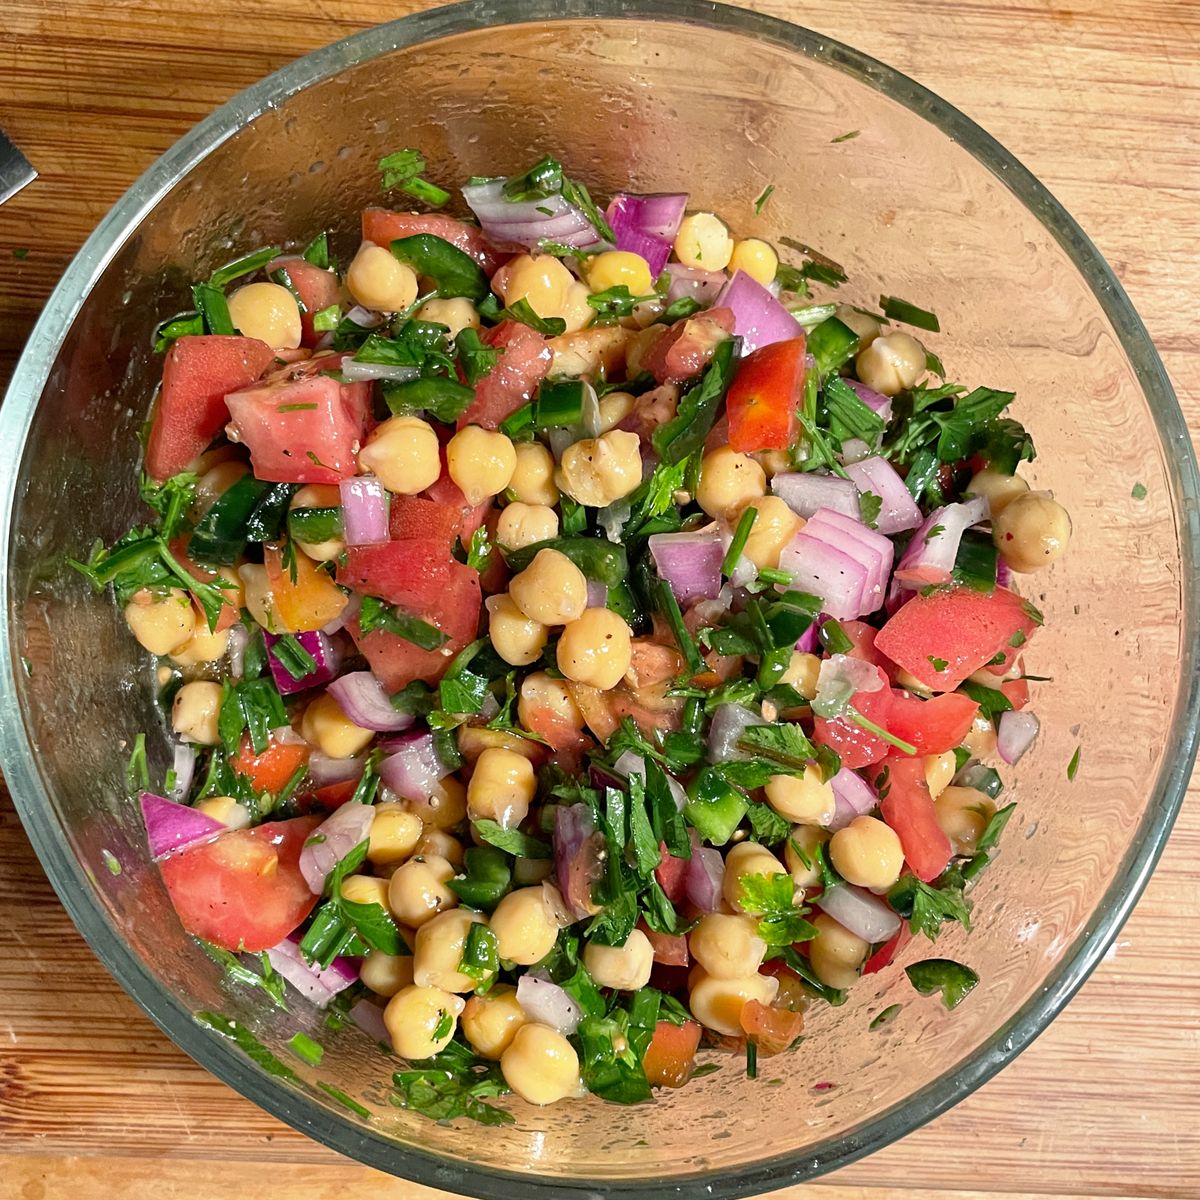 Chickpea Salad with Garden Herbs, Tomatoes, and Peppers